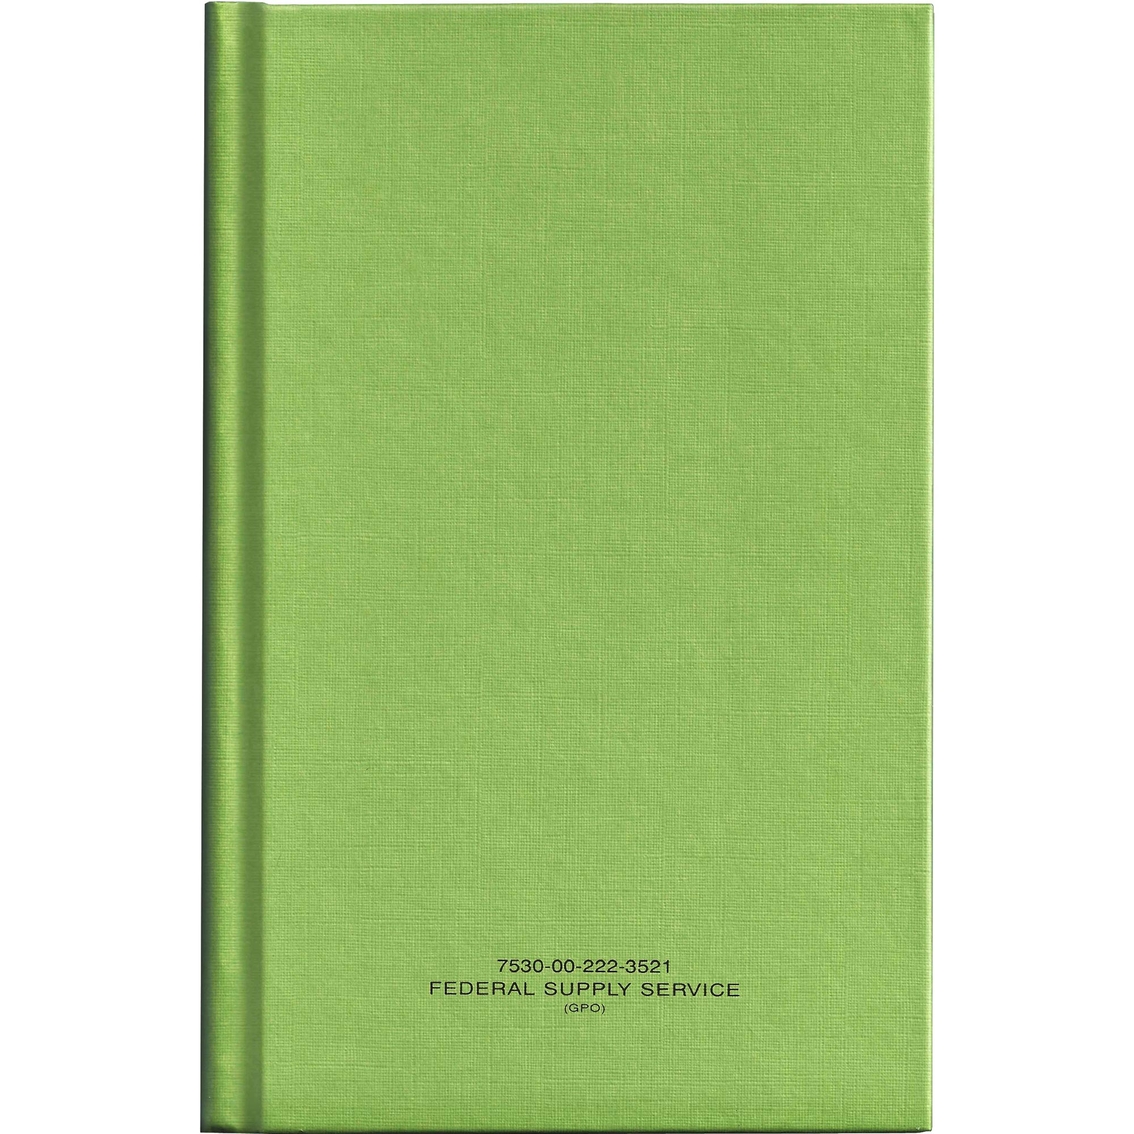 The Green Journal Leader's Military Log Book, Non-fiction, Household